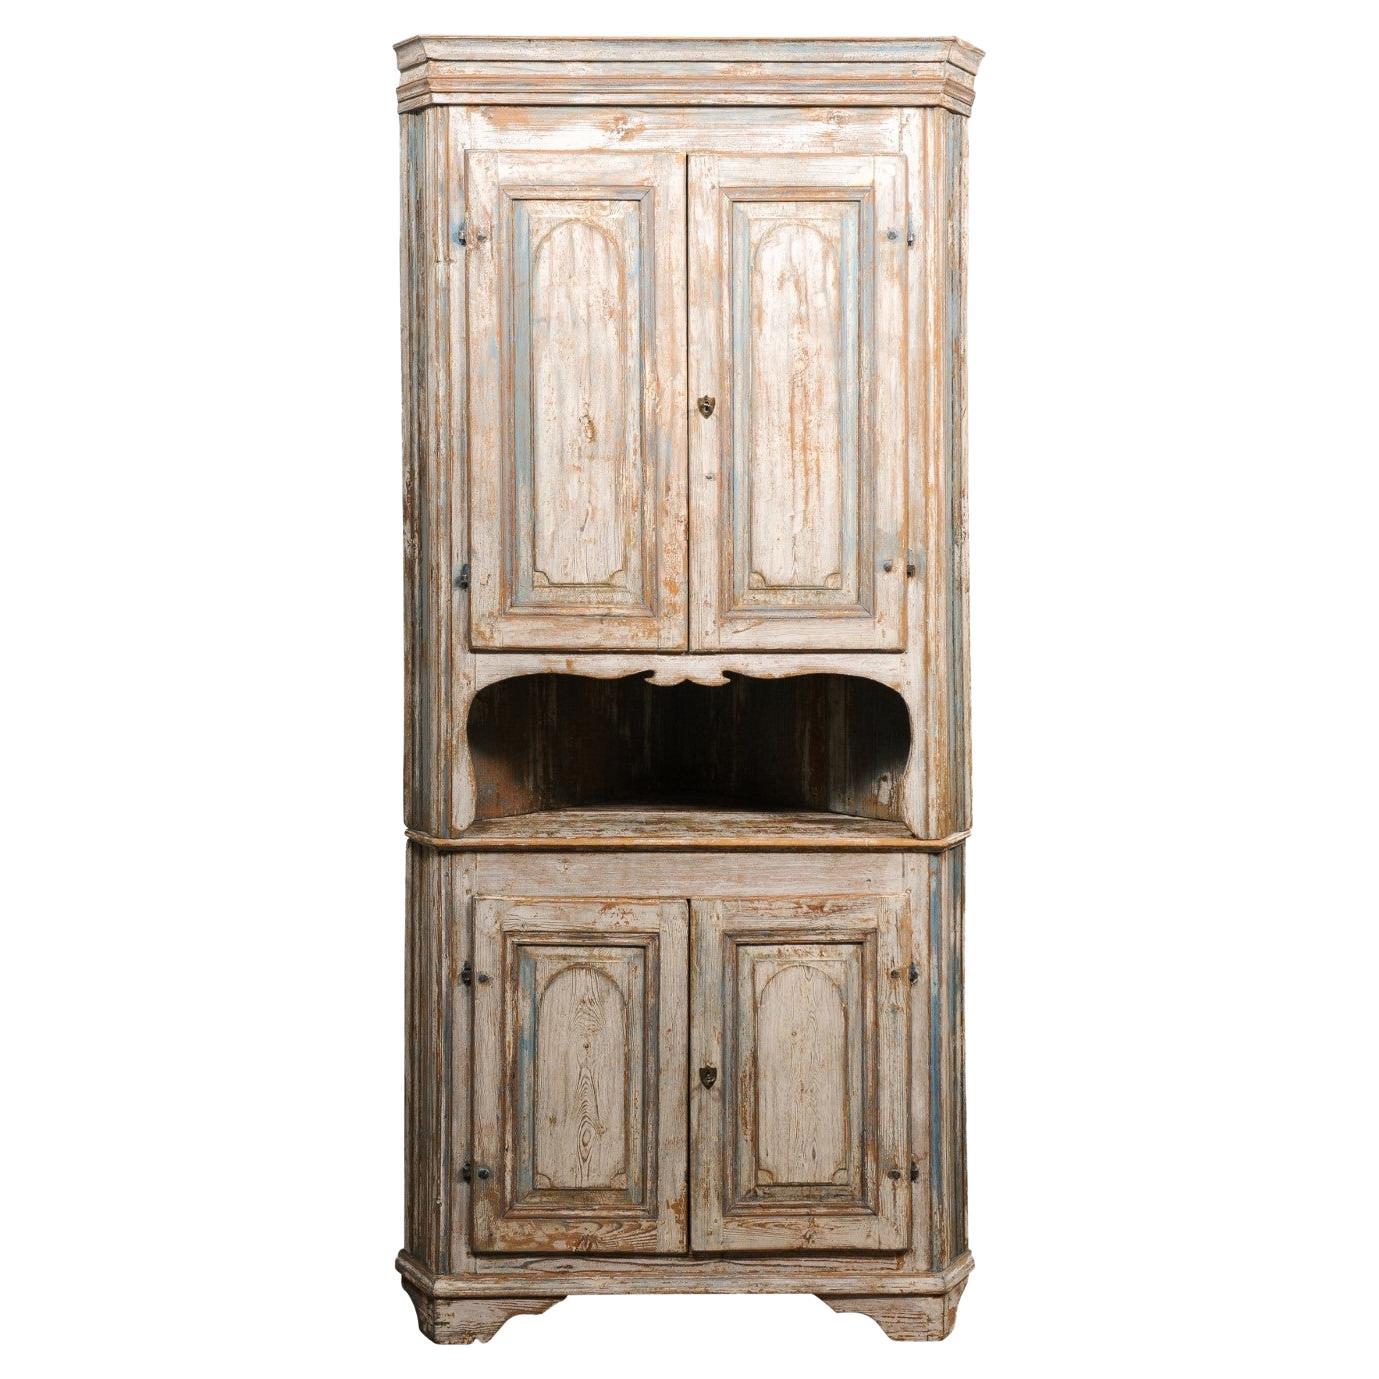 Swedish Gustavian Period 1800s Corner Cabinet with Carved Doors and Open Shelf For Sale